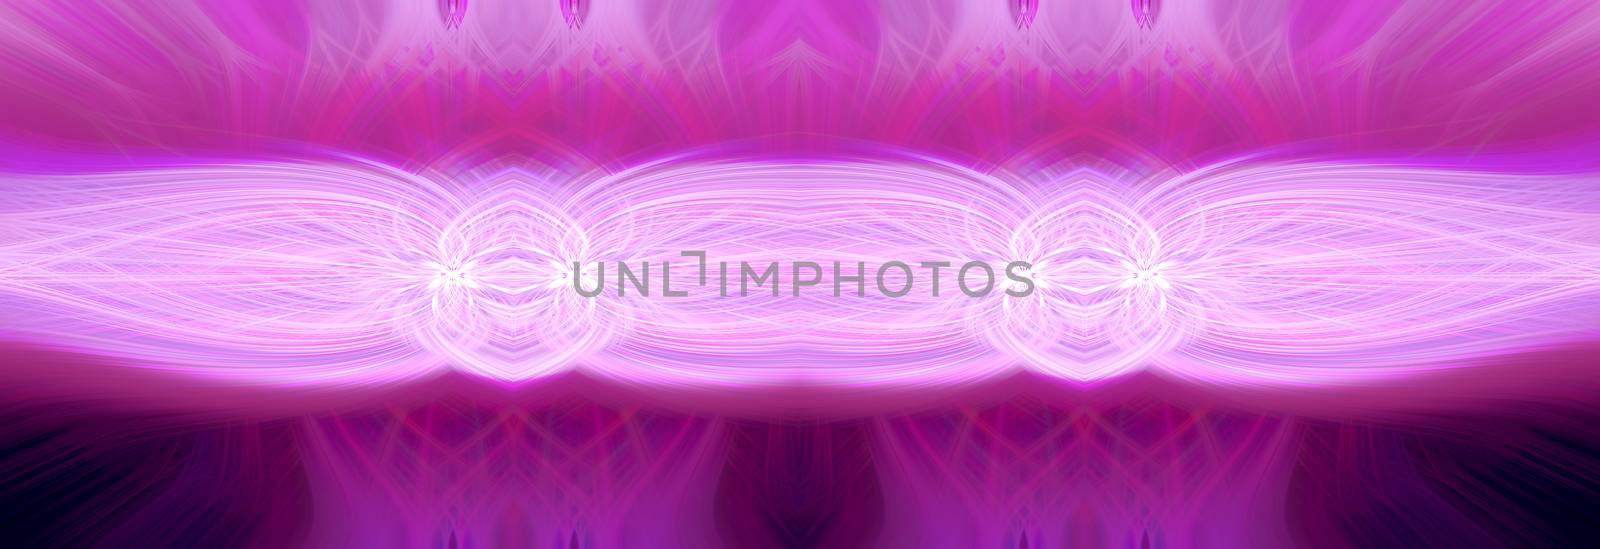 Beautiful abstract intertwined 3d fibers forming a shape of sparkle, flame, flower, interlinked hearts. Pink, maroon, and purple colors. Illustration. Banner, panorama size.